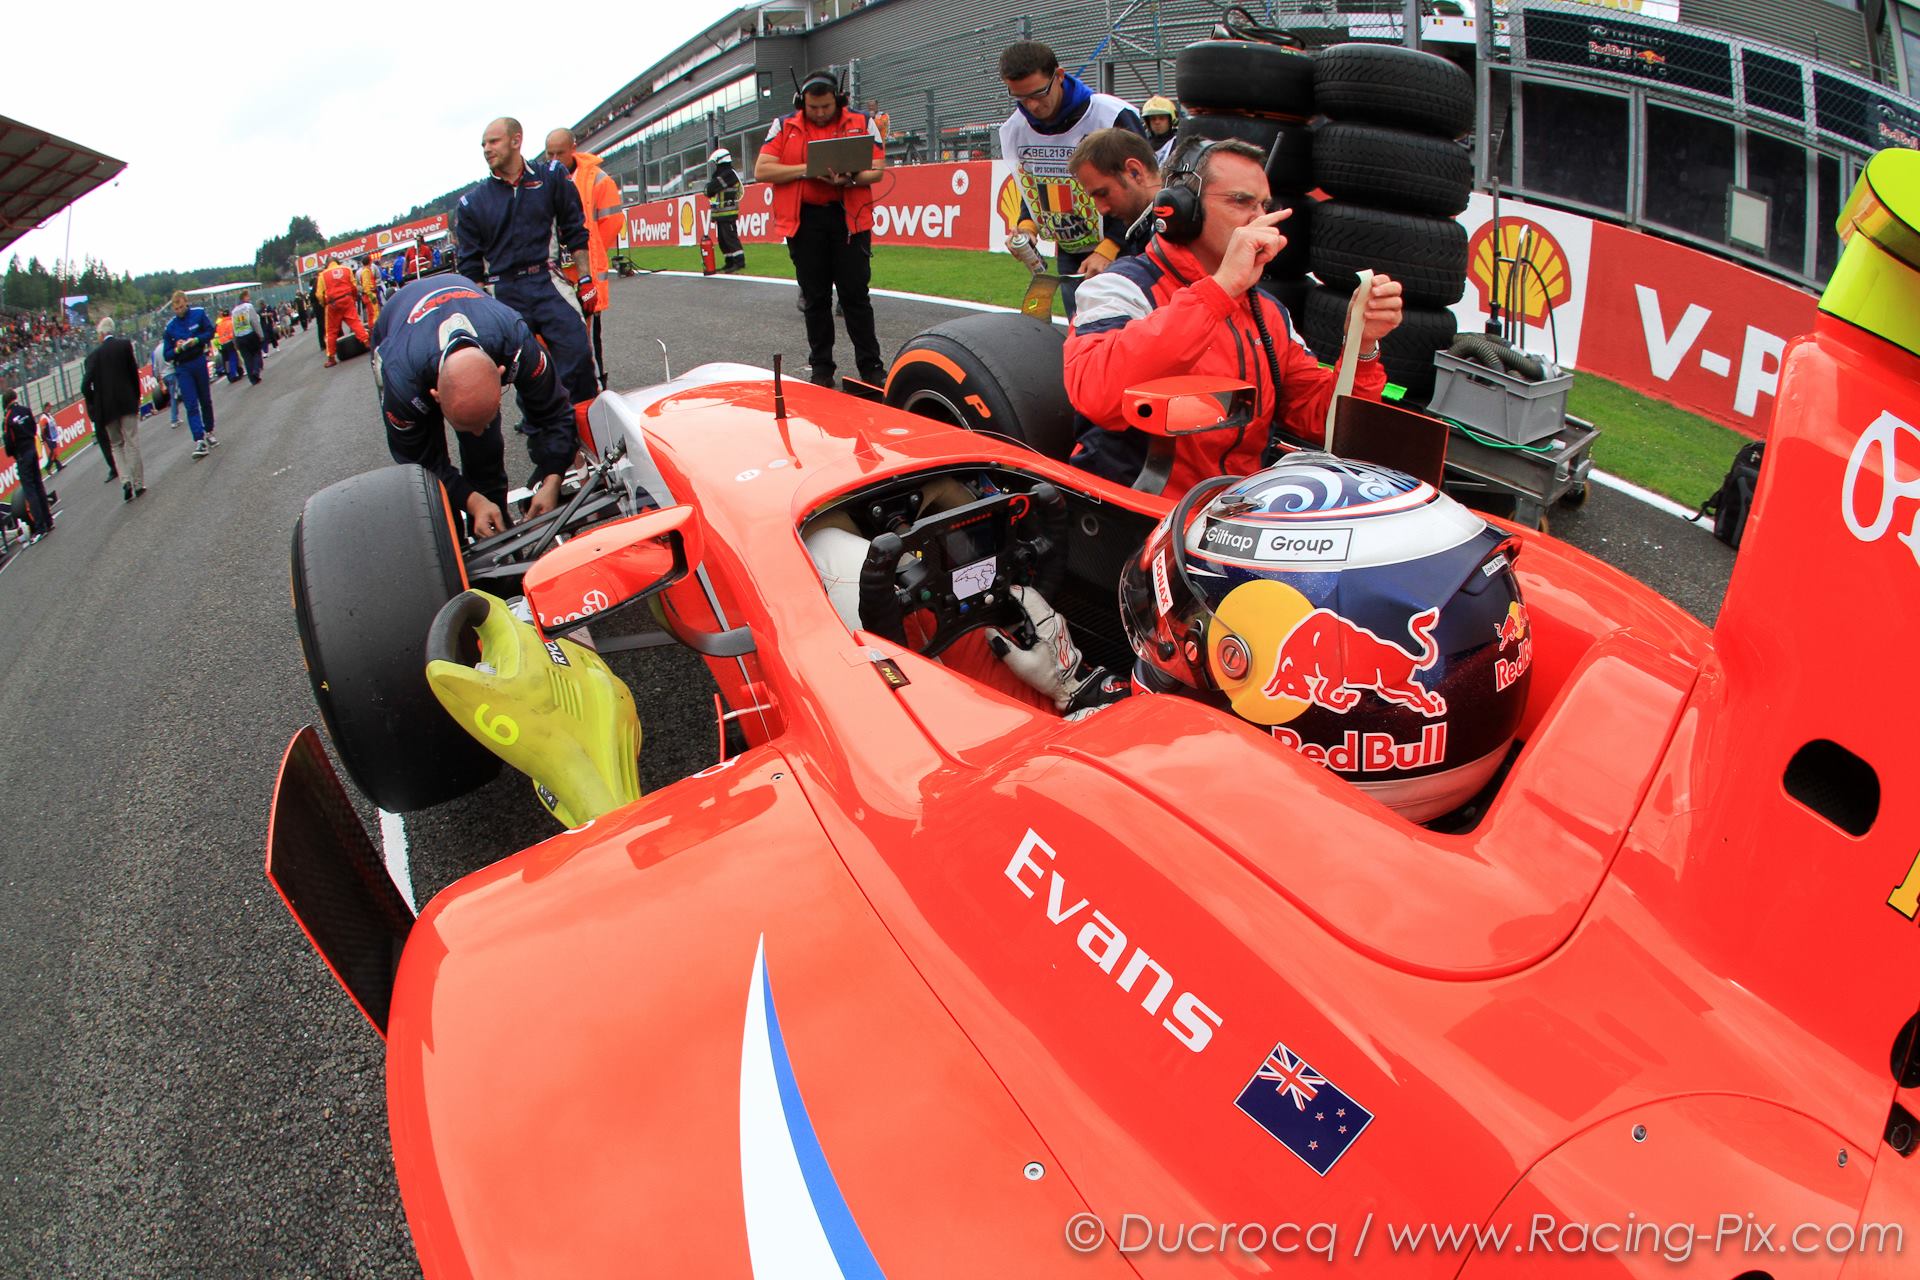 Crazy GP2 race sees early DNF for Evans and victory for Leimer